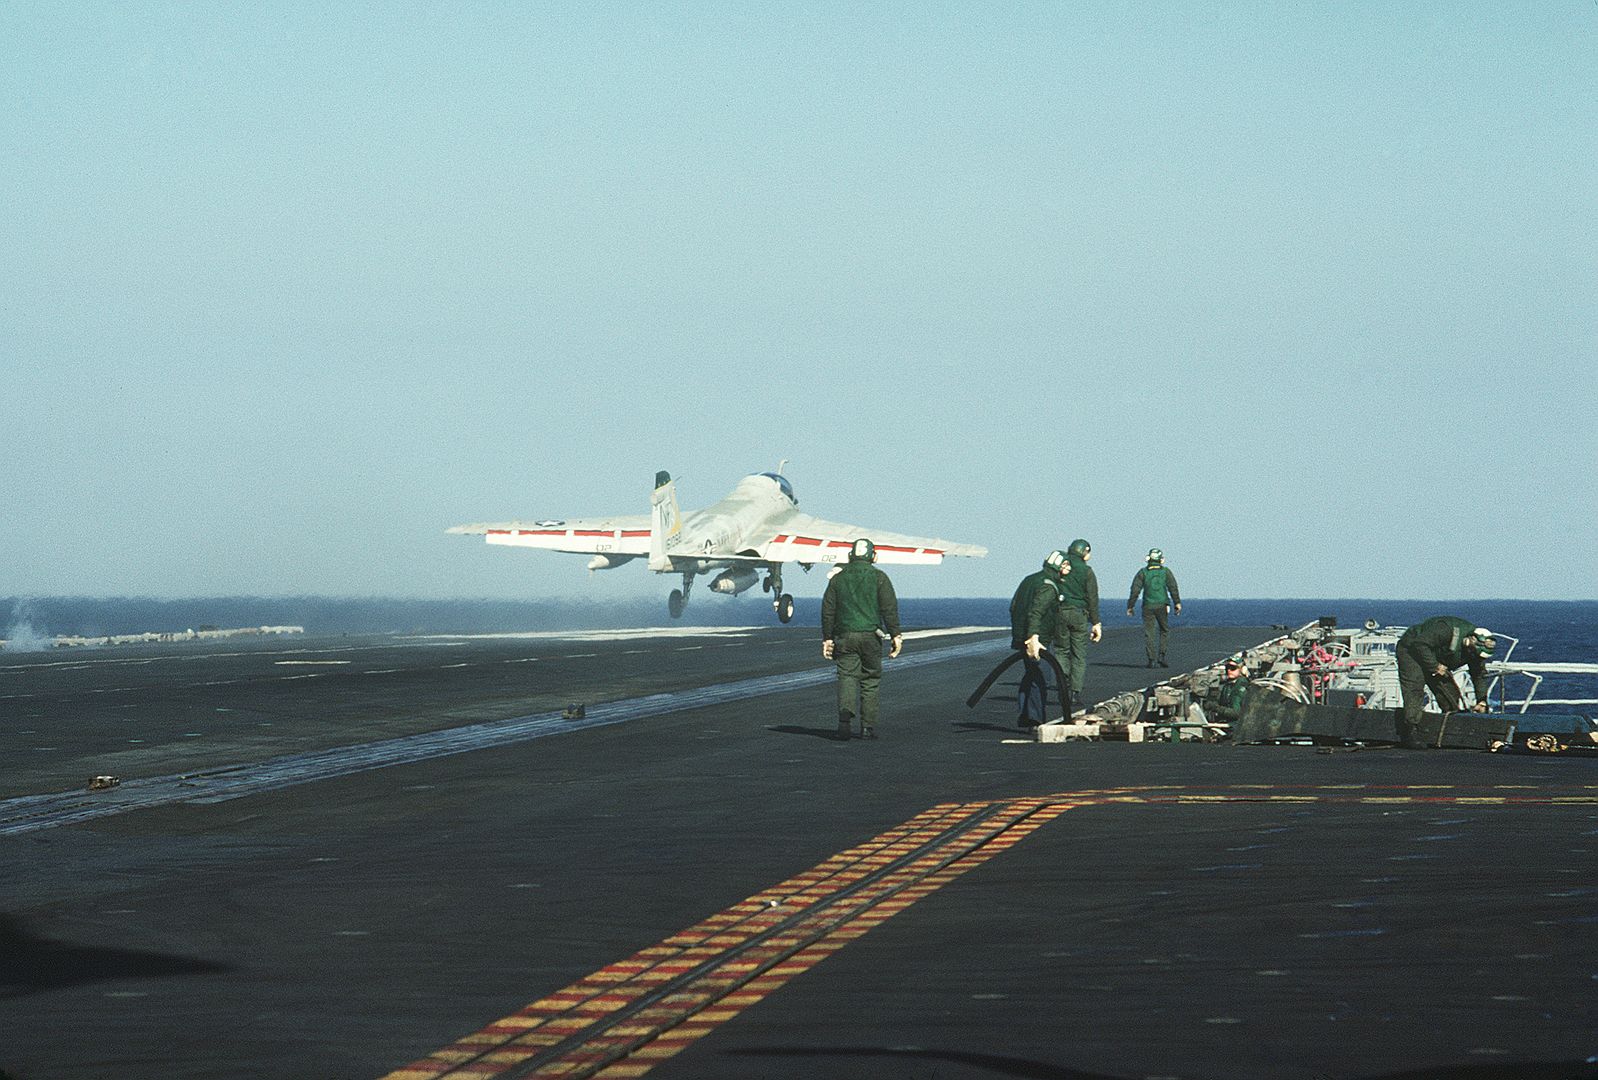 An A 6E Intruder Aircraft Is Catapulted From The Flight Deck Of The Aircraft Carrier USS MIDWAY 